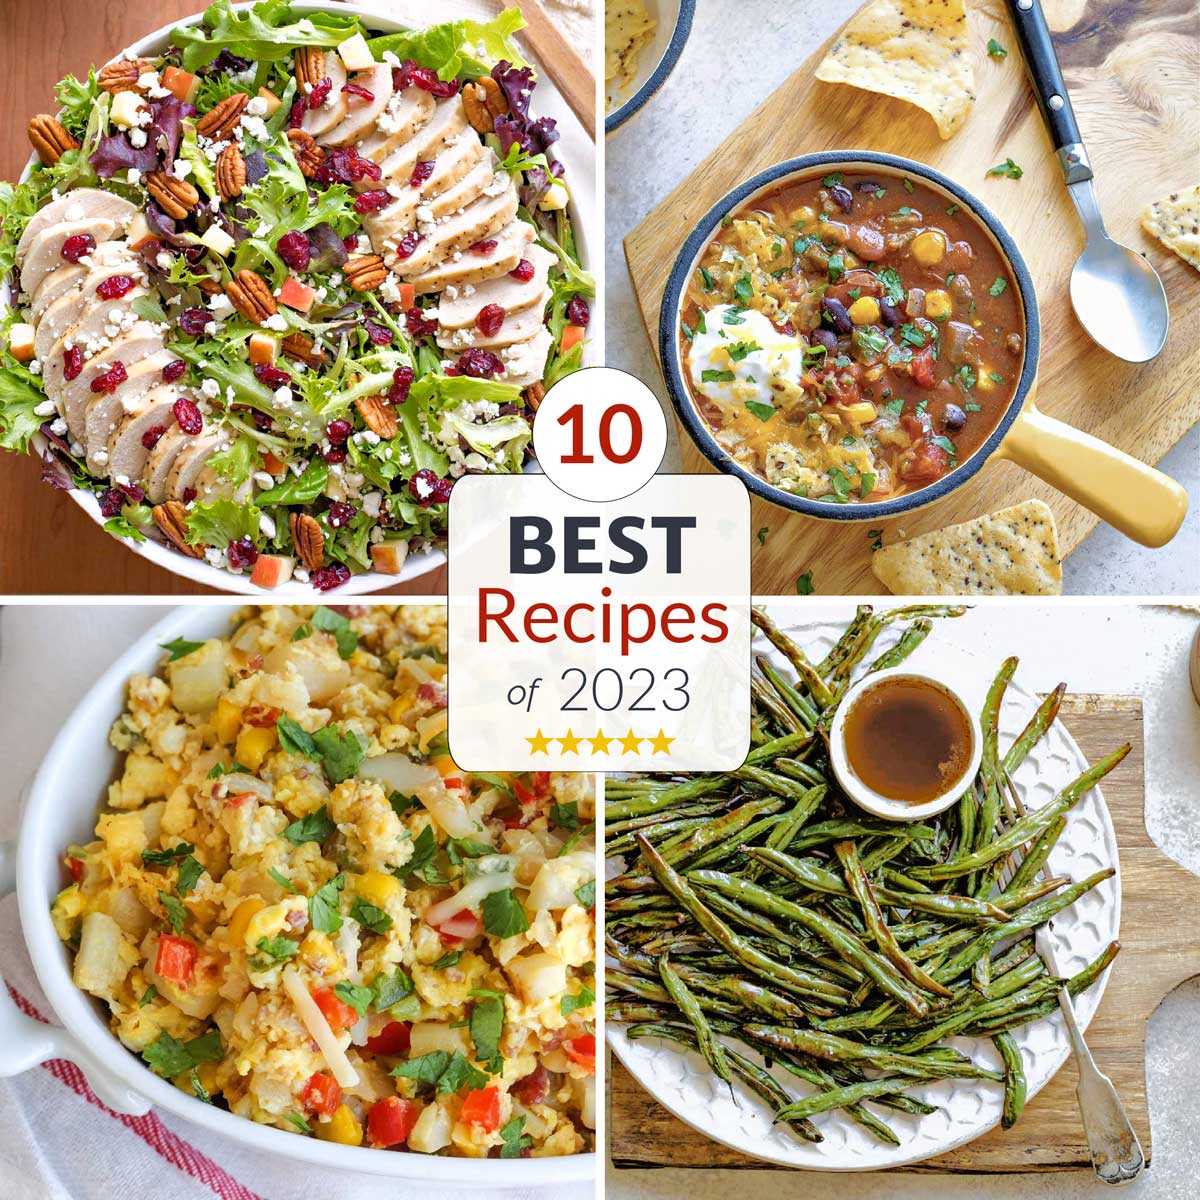 Square collage of 4 recipes (chicken salad, taco soup, egg scramble and green beans) with text overlay "10 Best Recipes of 2023".